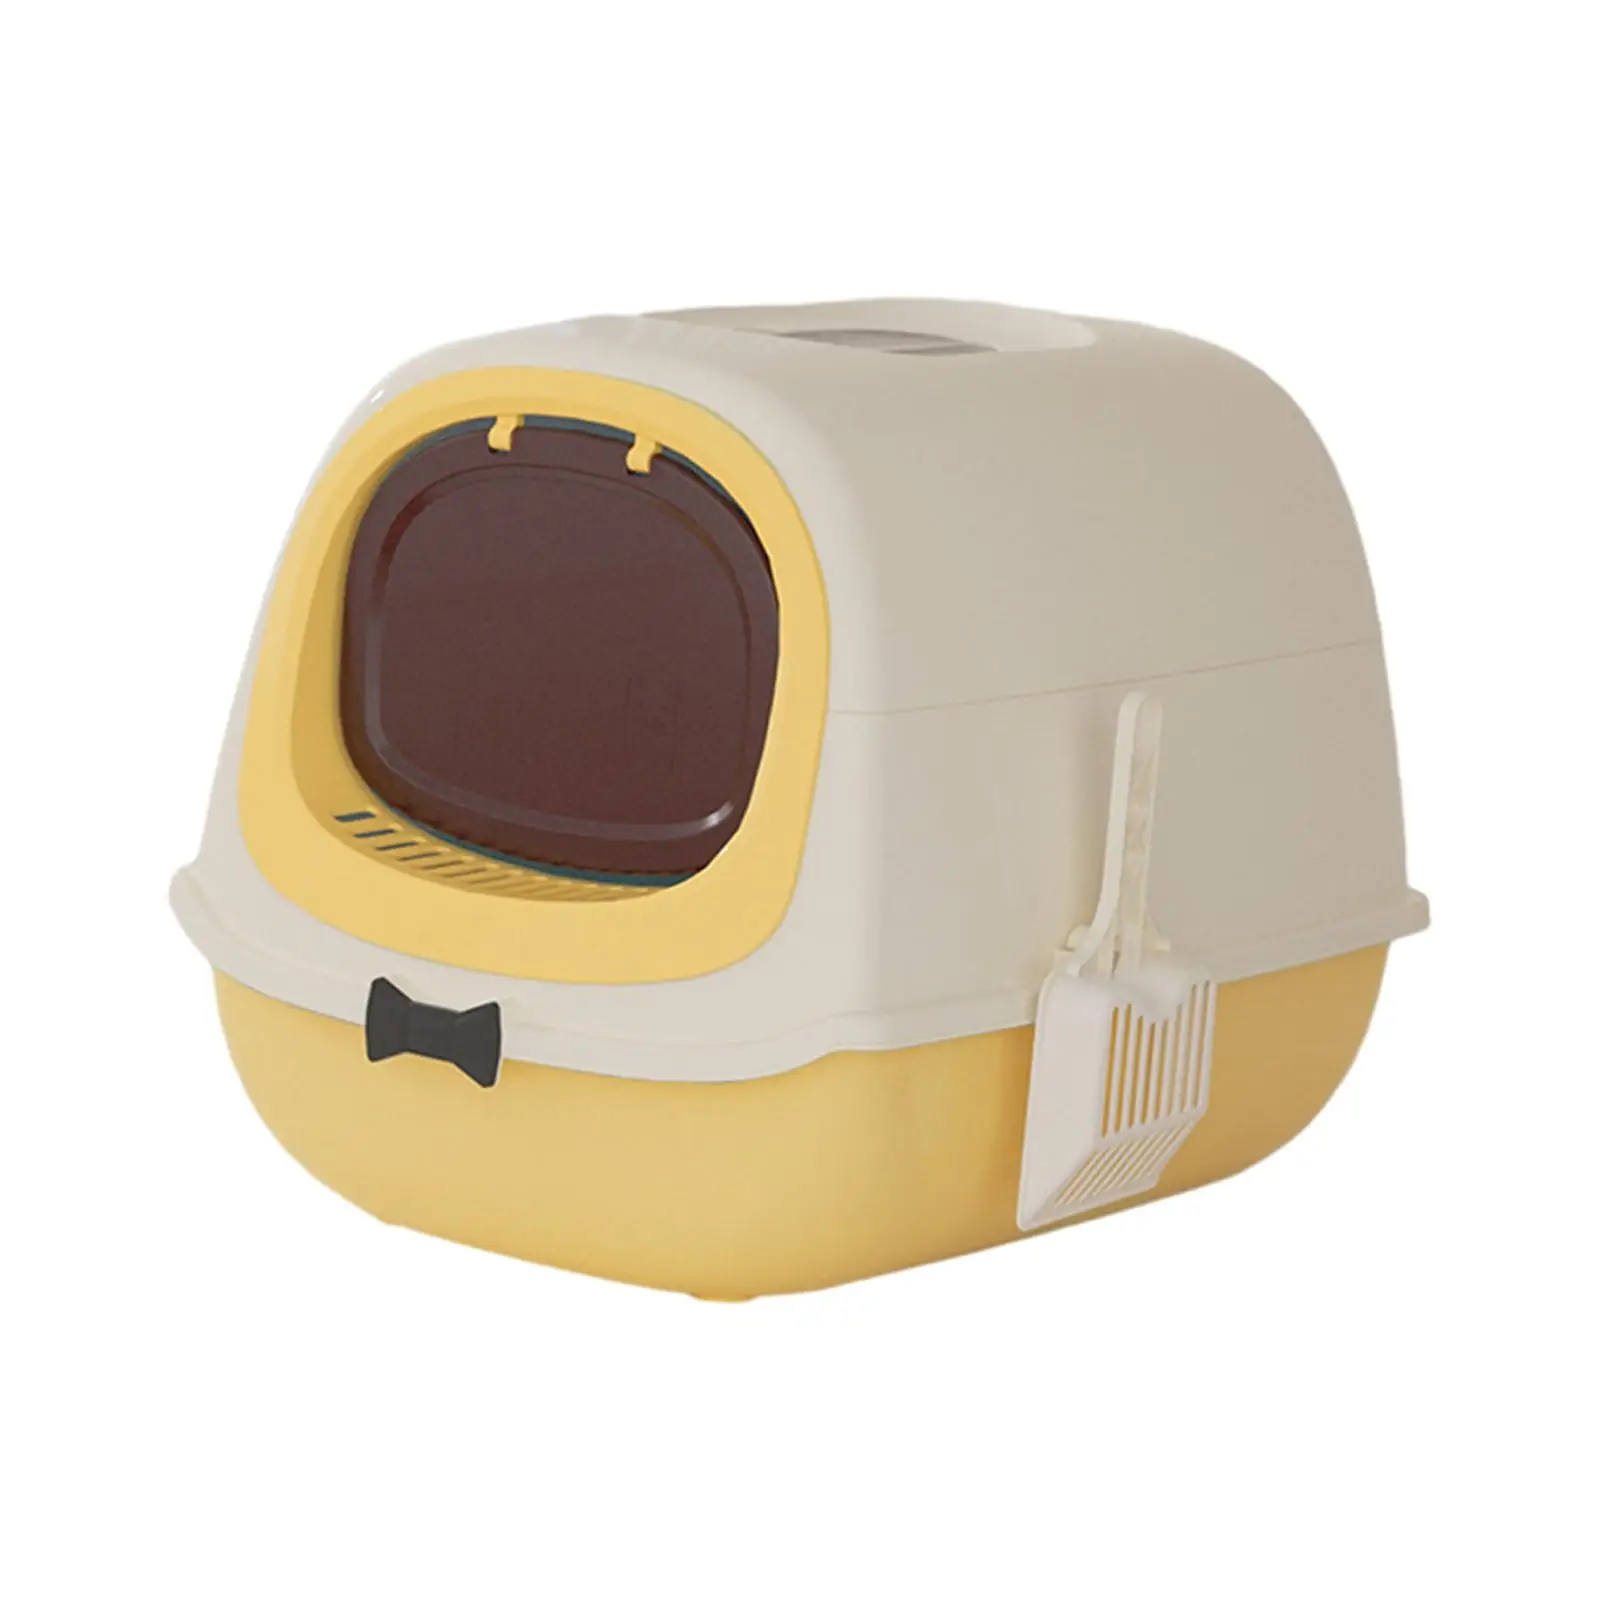 Hooded Cat Litter Box with Lid Odorless Portable Detachable Large Cat Potty